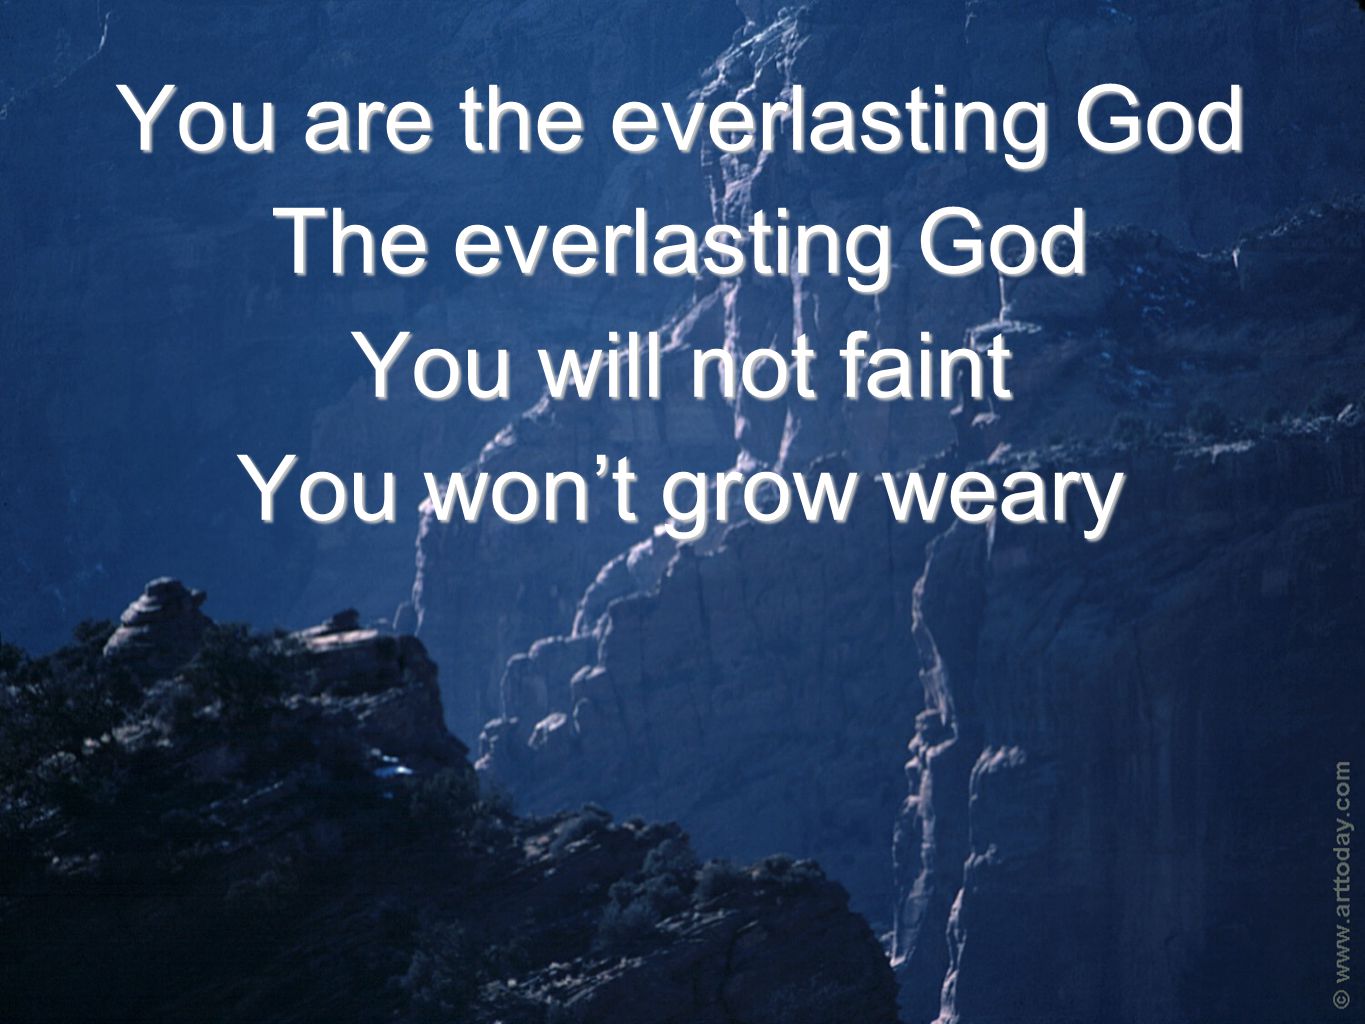 You are the everlasting God The everlasting God You will not faint You won’t grow weary